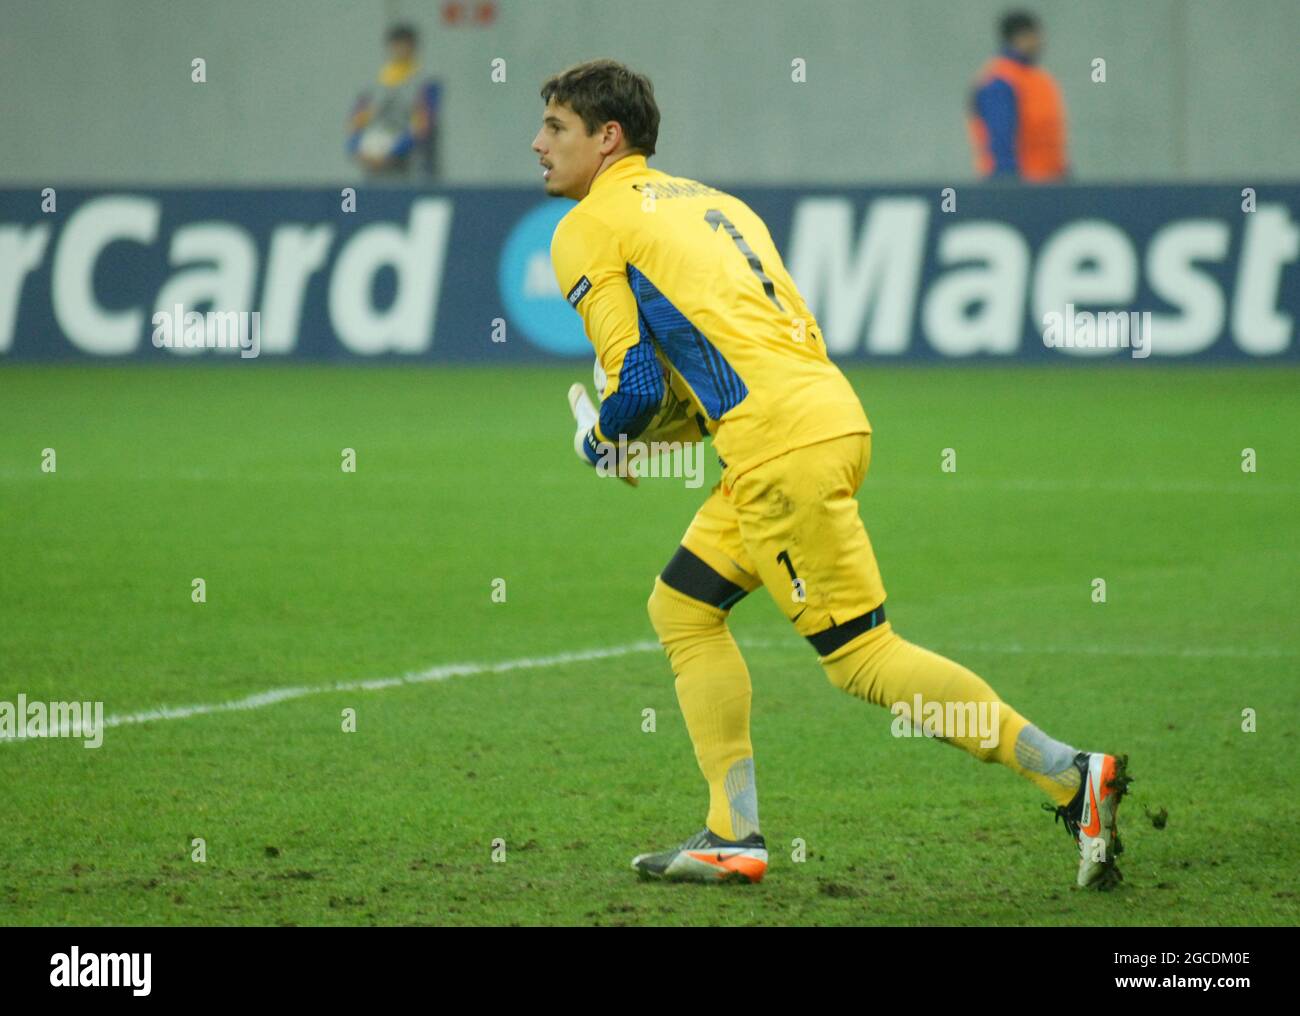 BUCHAREST, ROMANIA - NOVEMBER 22, 2011: Yann Sommer of Basel pictured in action during the 2011/12 UEFA Champions League Group C game between Otelul Galati and FC Basel at National Arena. Stock Photo